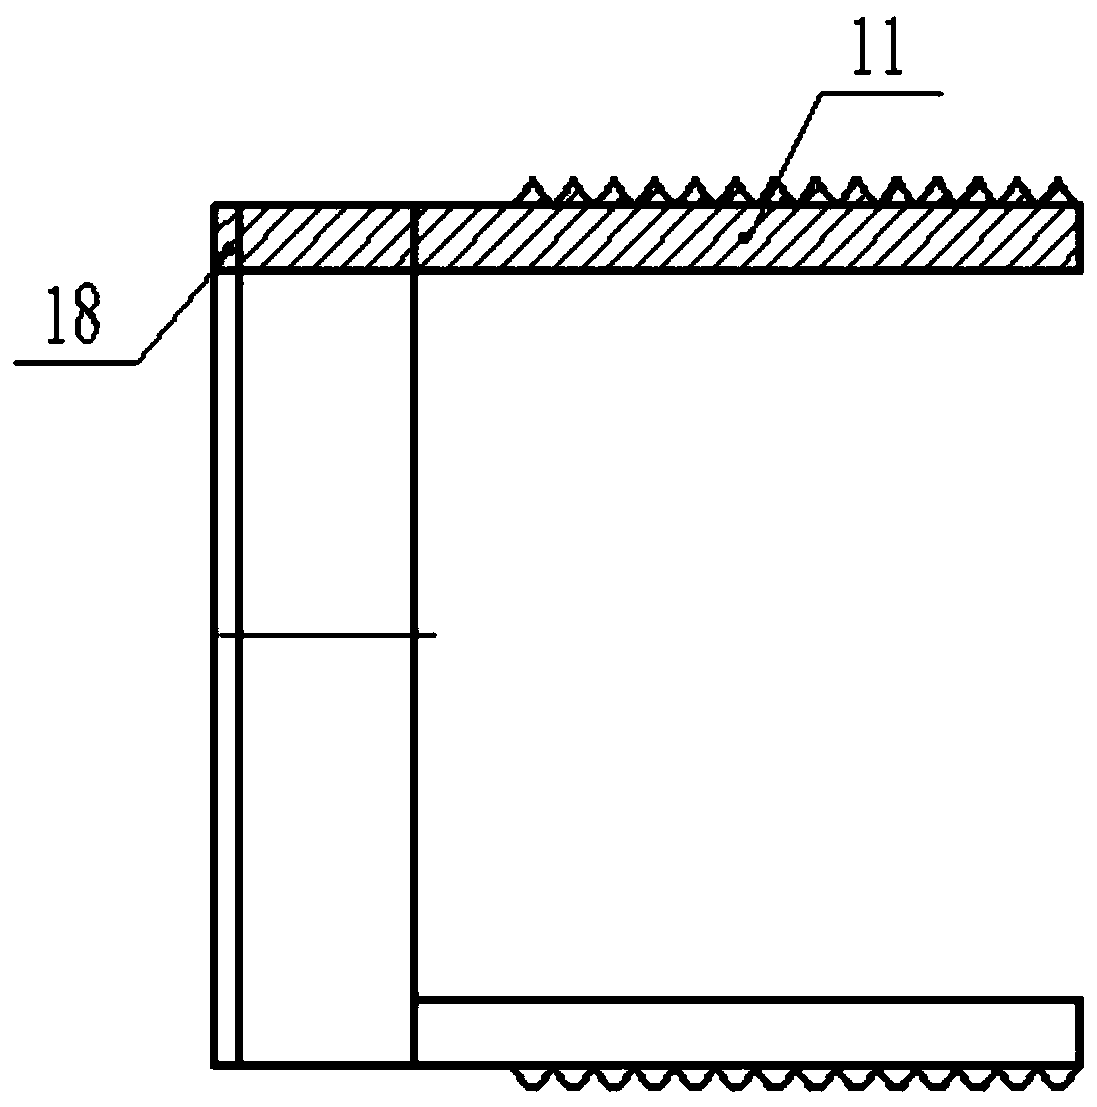 An anchoring device for expansion bolts used in building walls